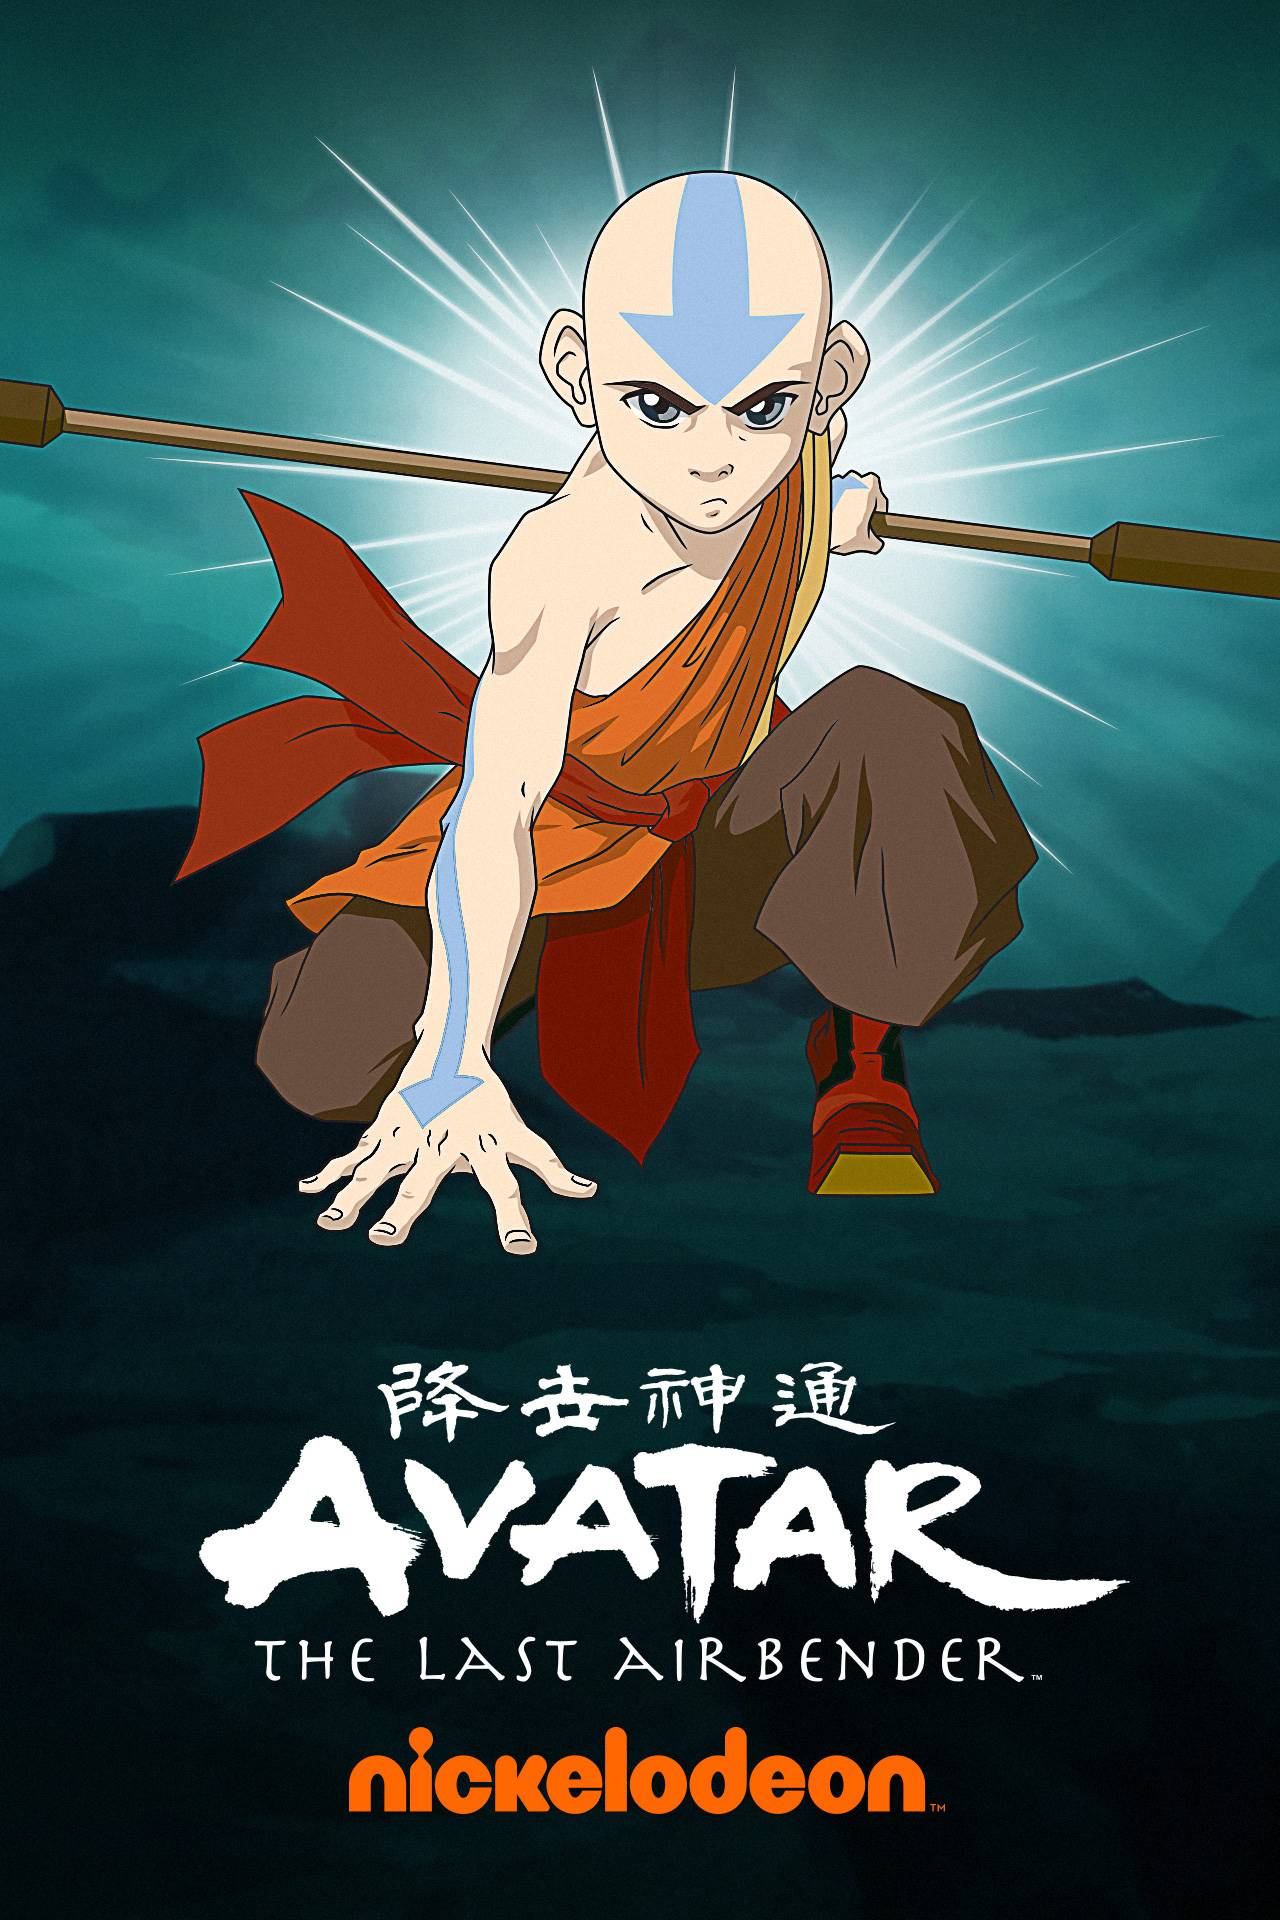 ash cake recommends The Last Air Bender Pictures